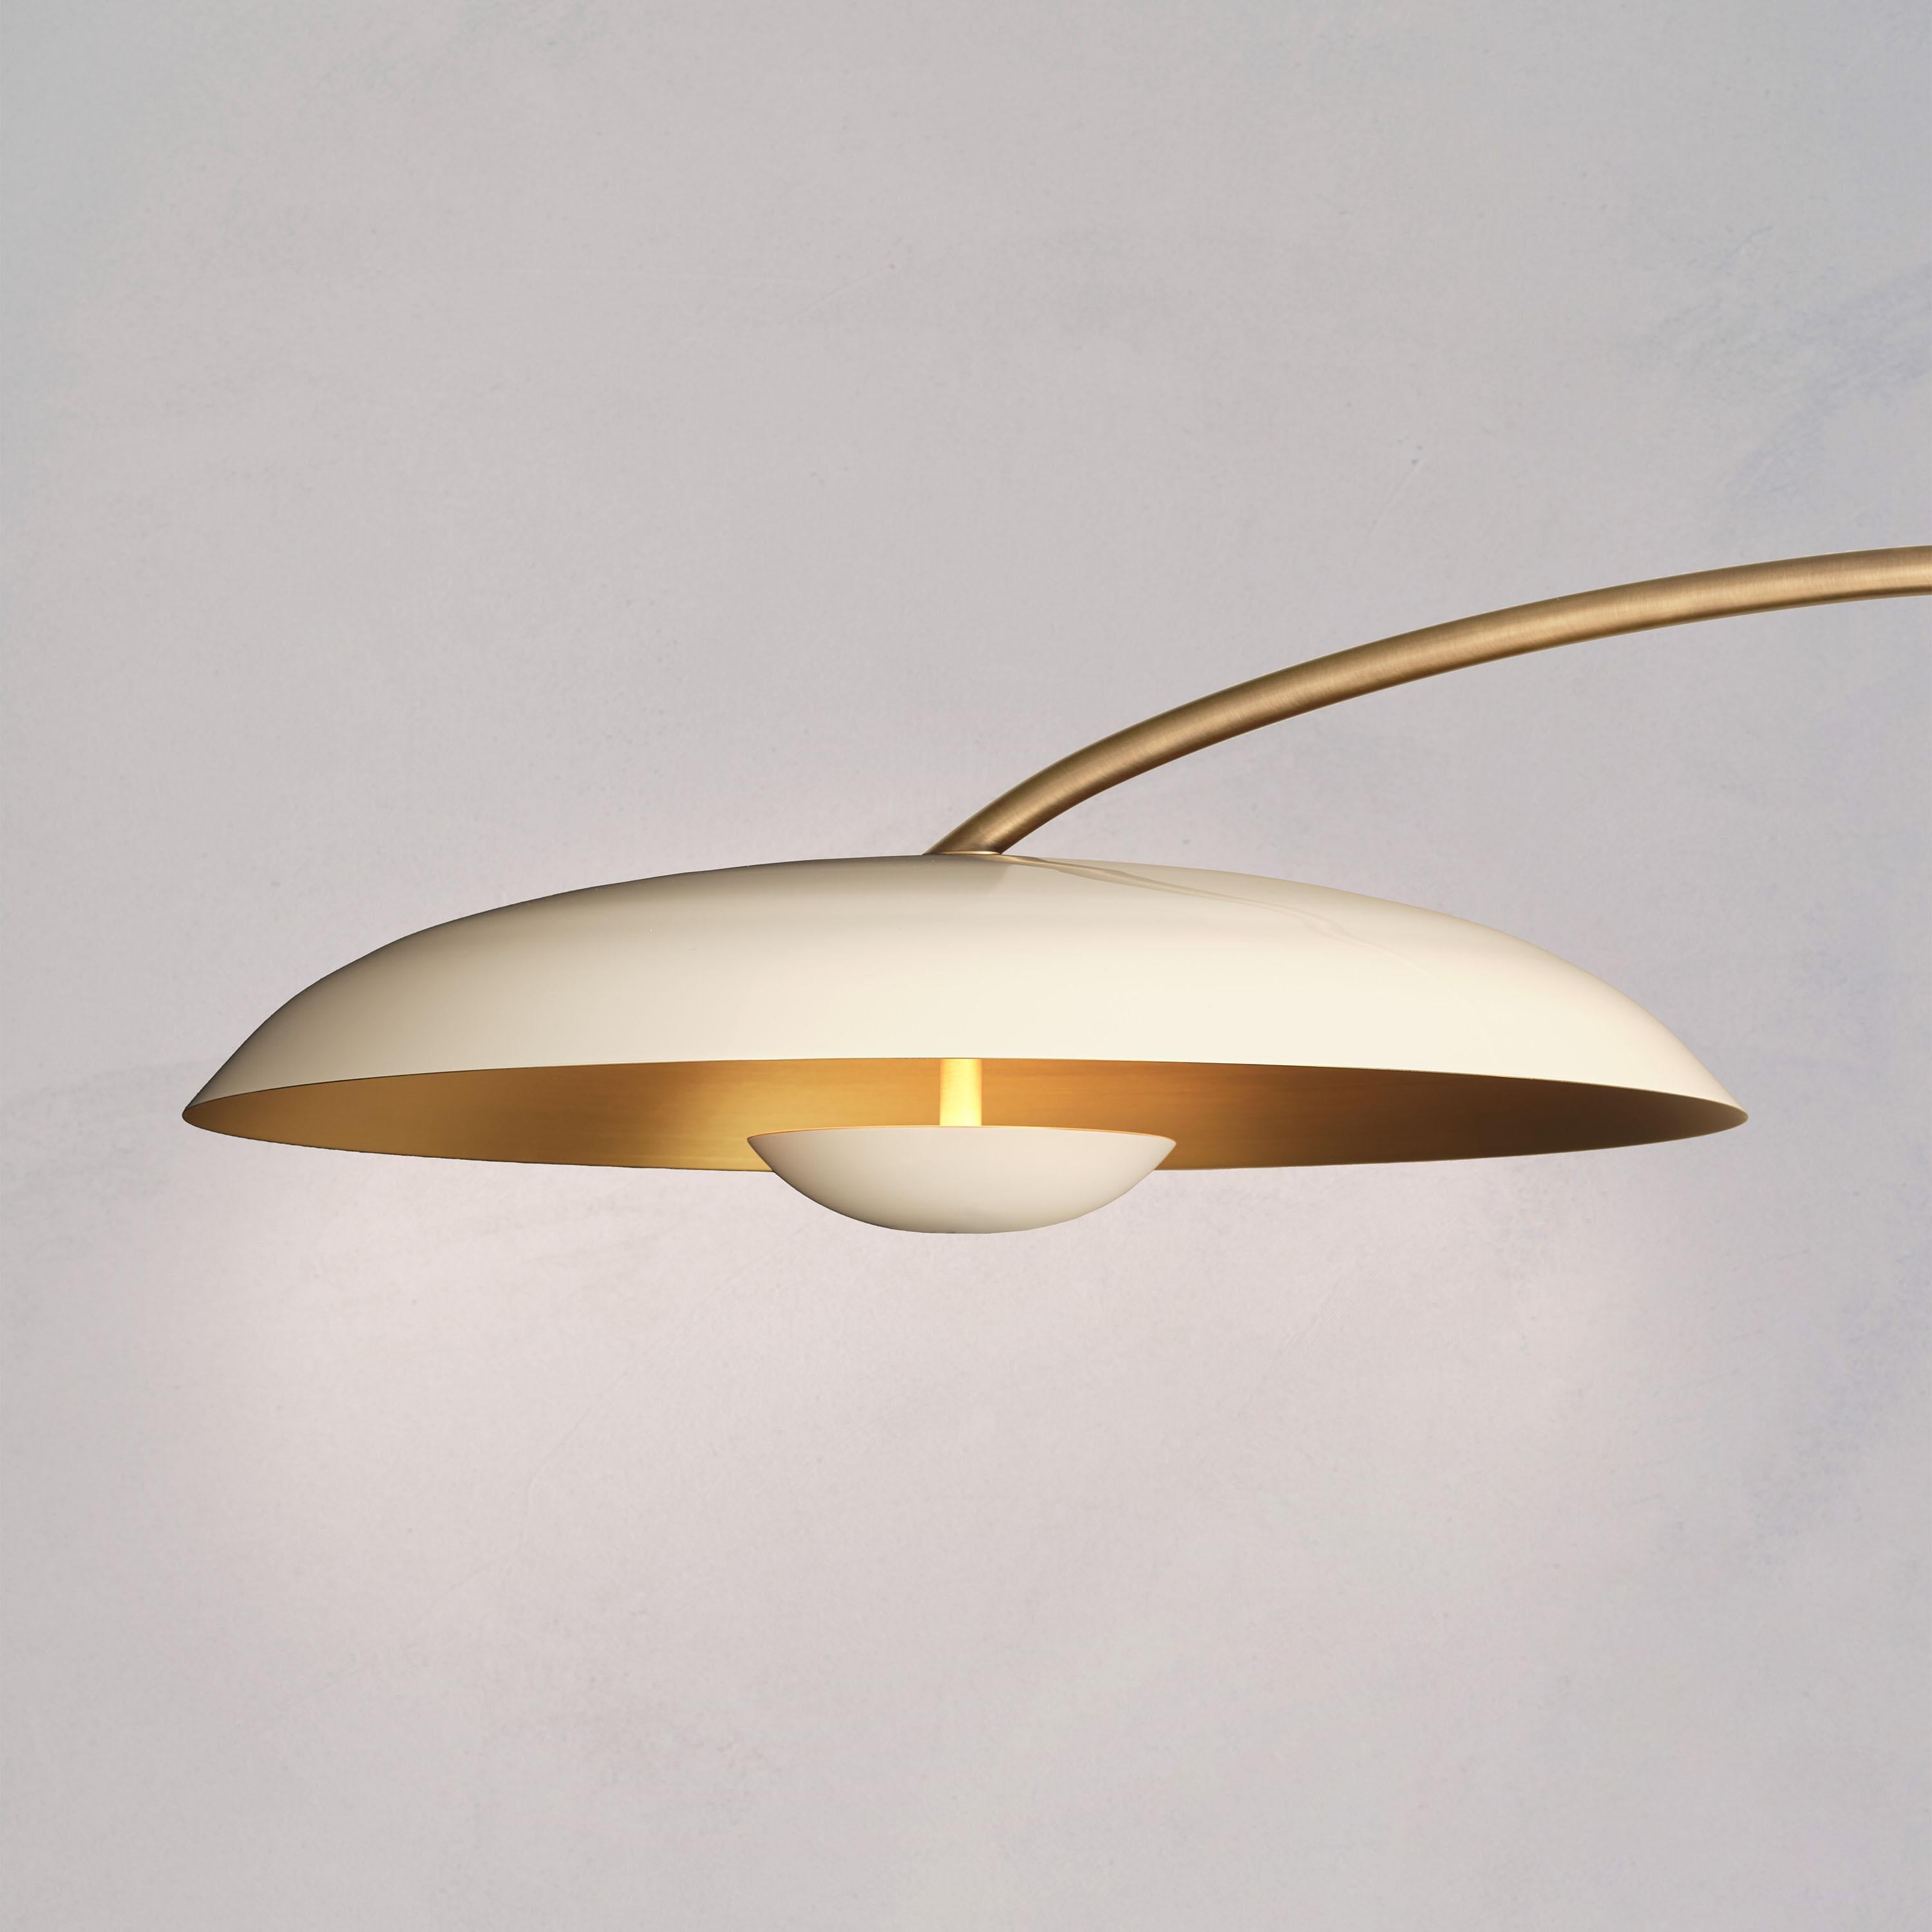 English 'Cosmic Orbit Solo Purion' Handmade Gloss White Lacquered Brass Ceiling Light For Sale